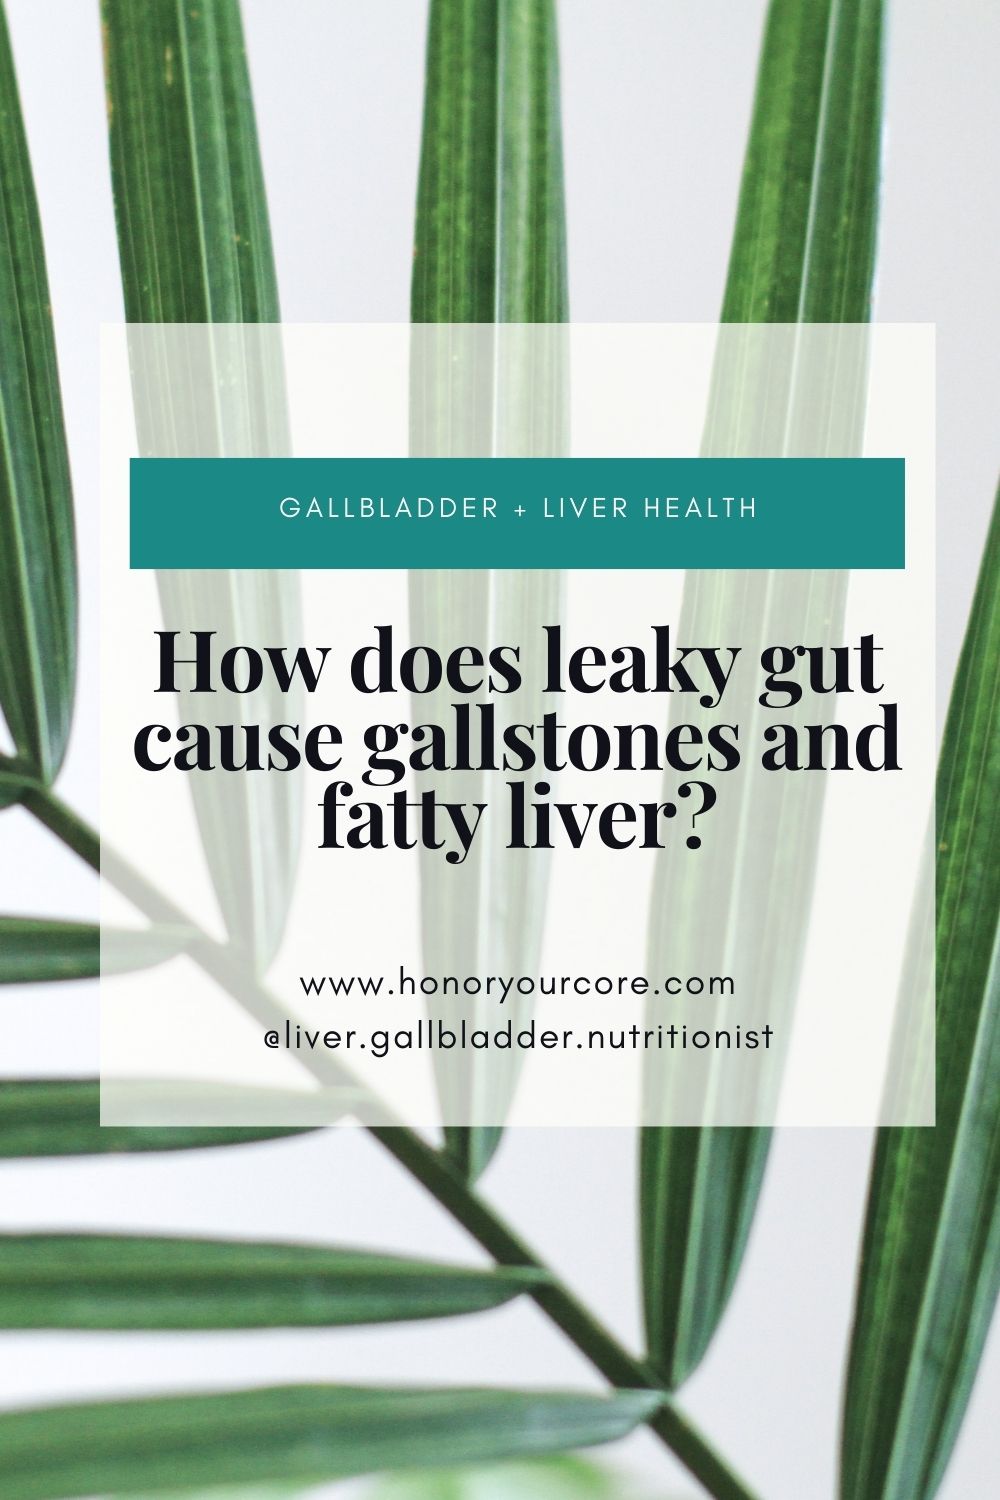 How does leaky gut cause gallstones and fatty liver?